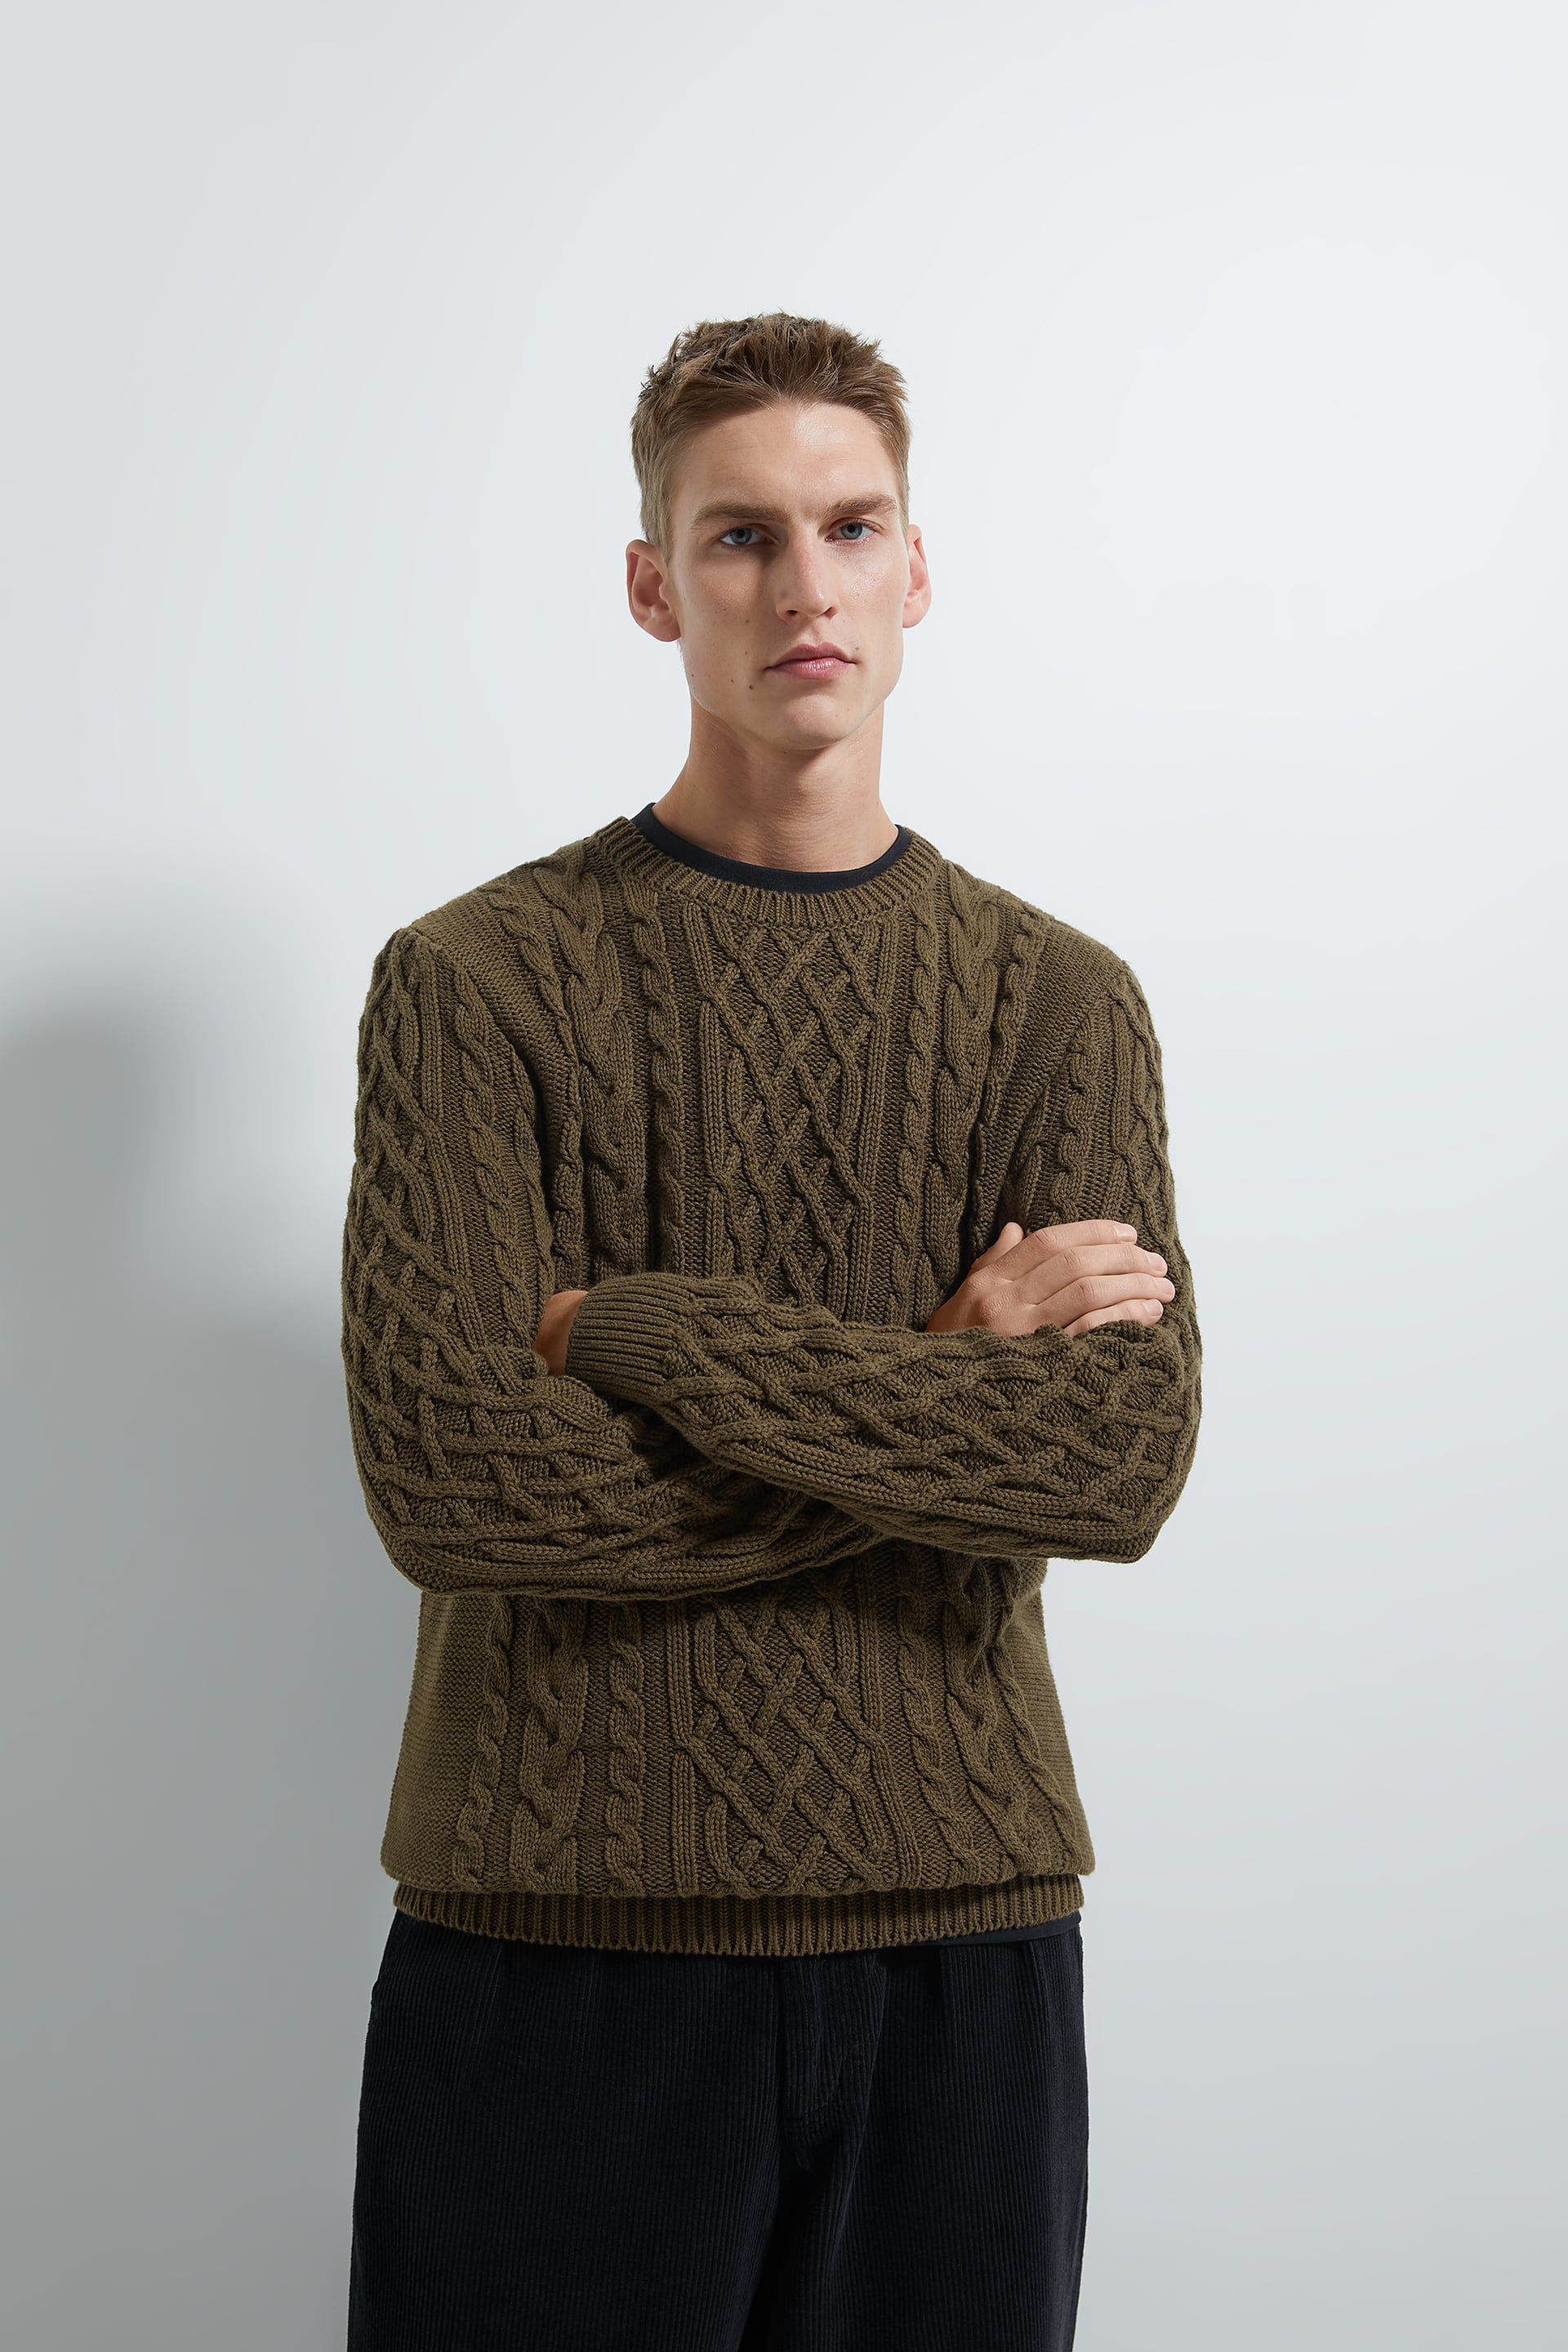 The Best Men's Knitwear Pieces You Should Own - VanityForbes